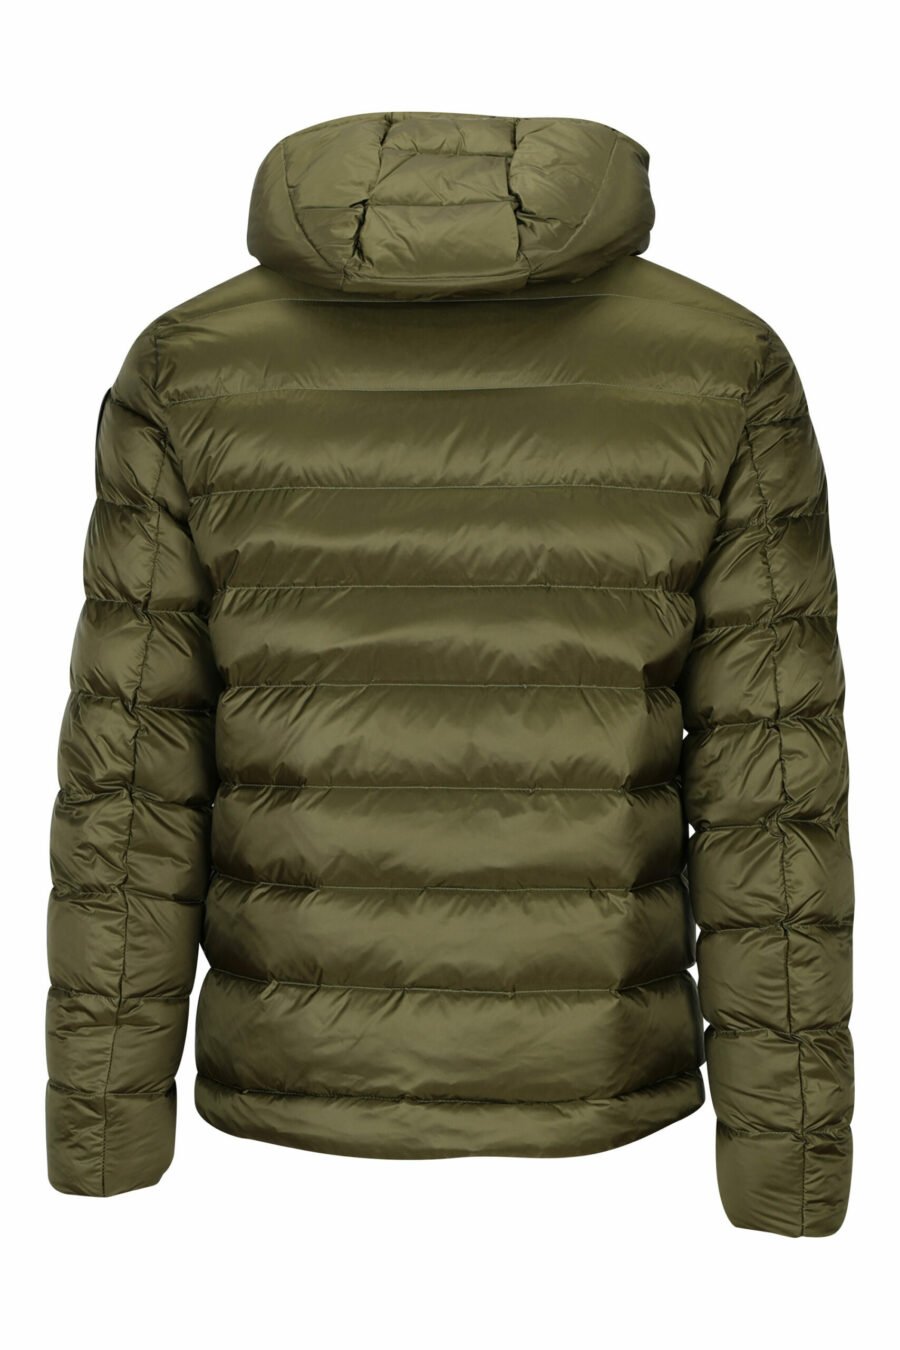 Military green hooded jacket with straight lines and yellow inside - 8058610657482 3 scaled